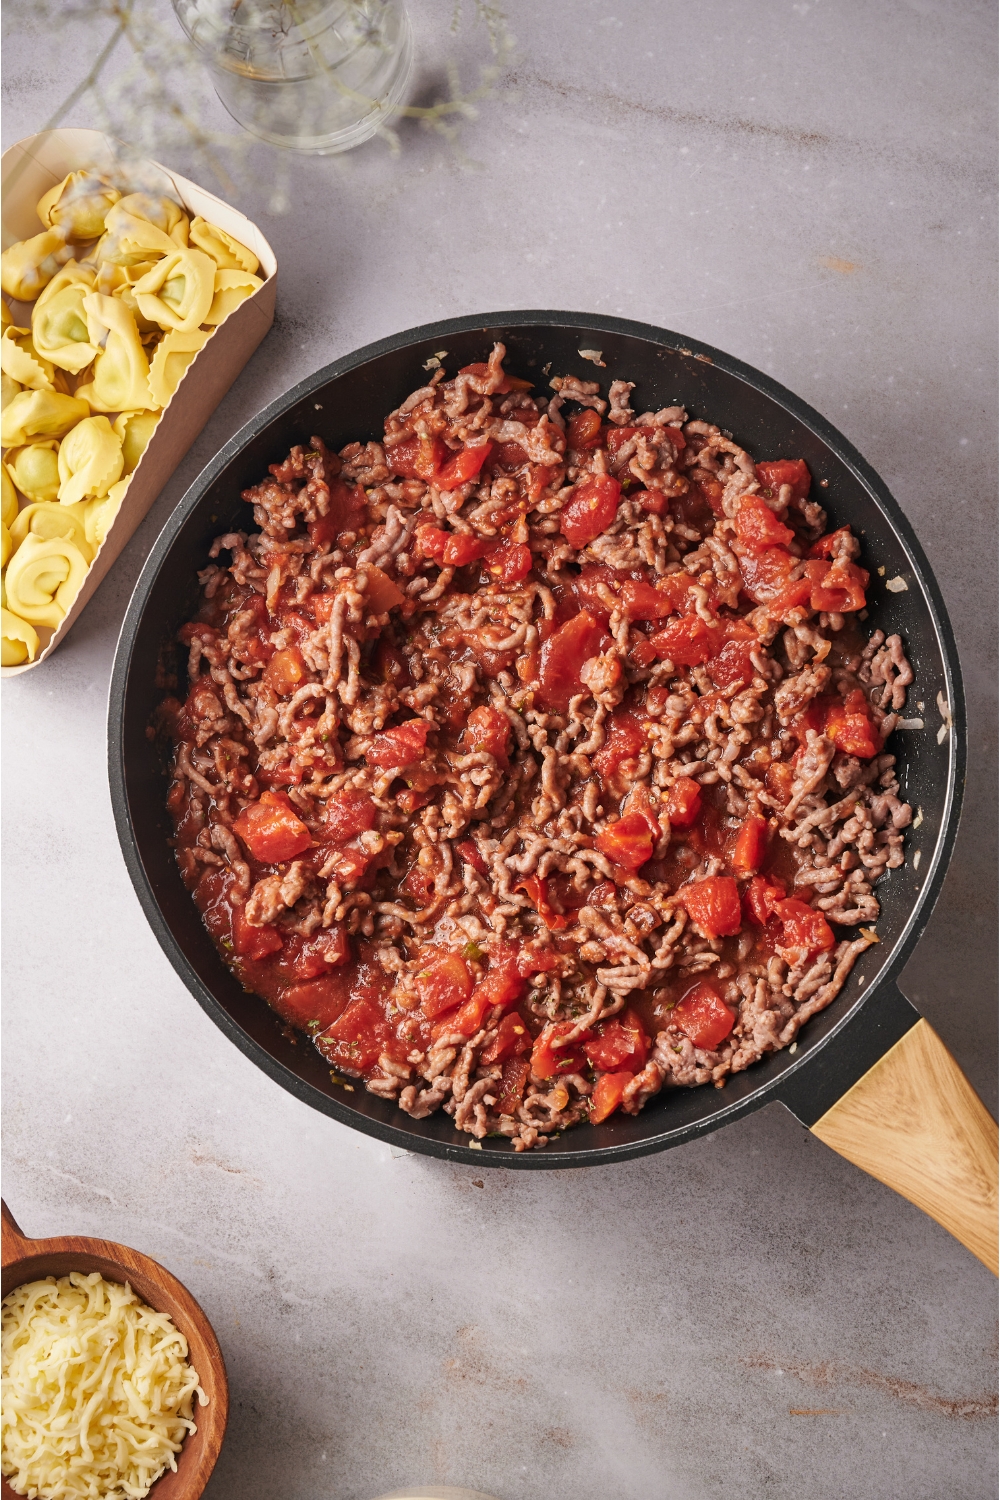 A skillet filled with cooked ground beef mixed with crushed tomatoes.